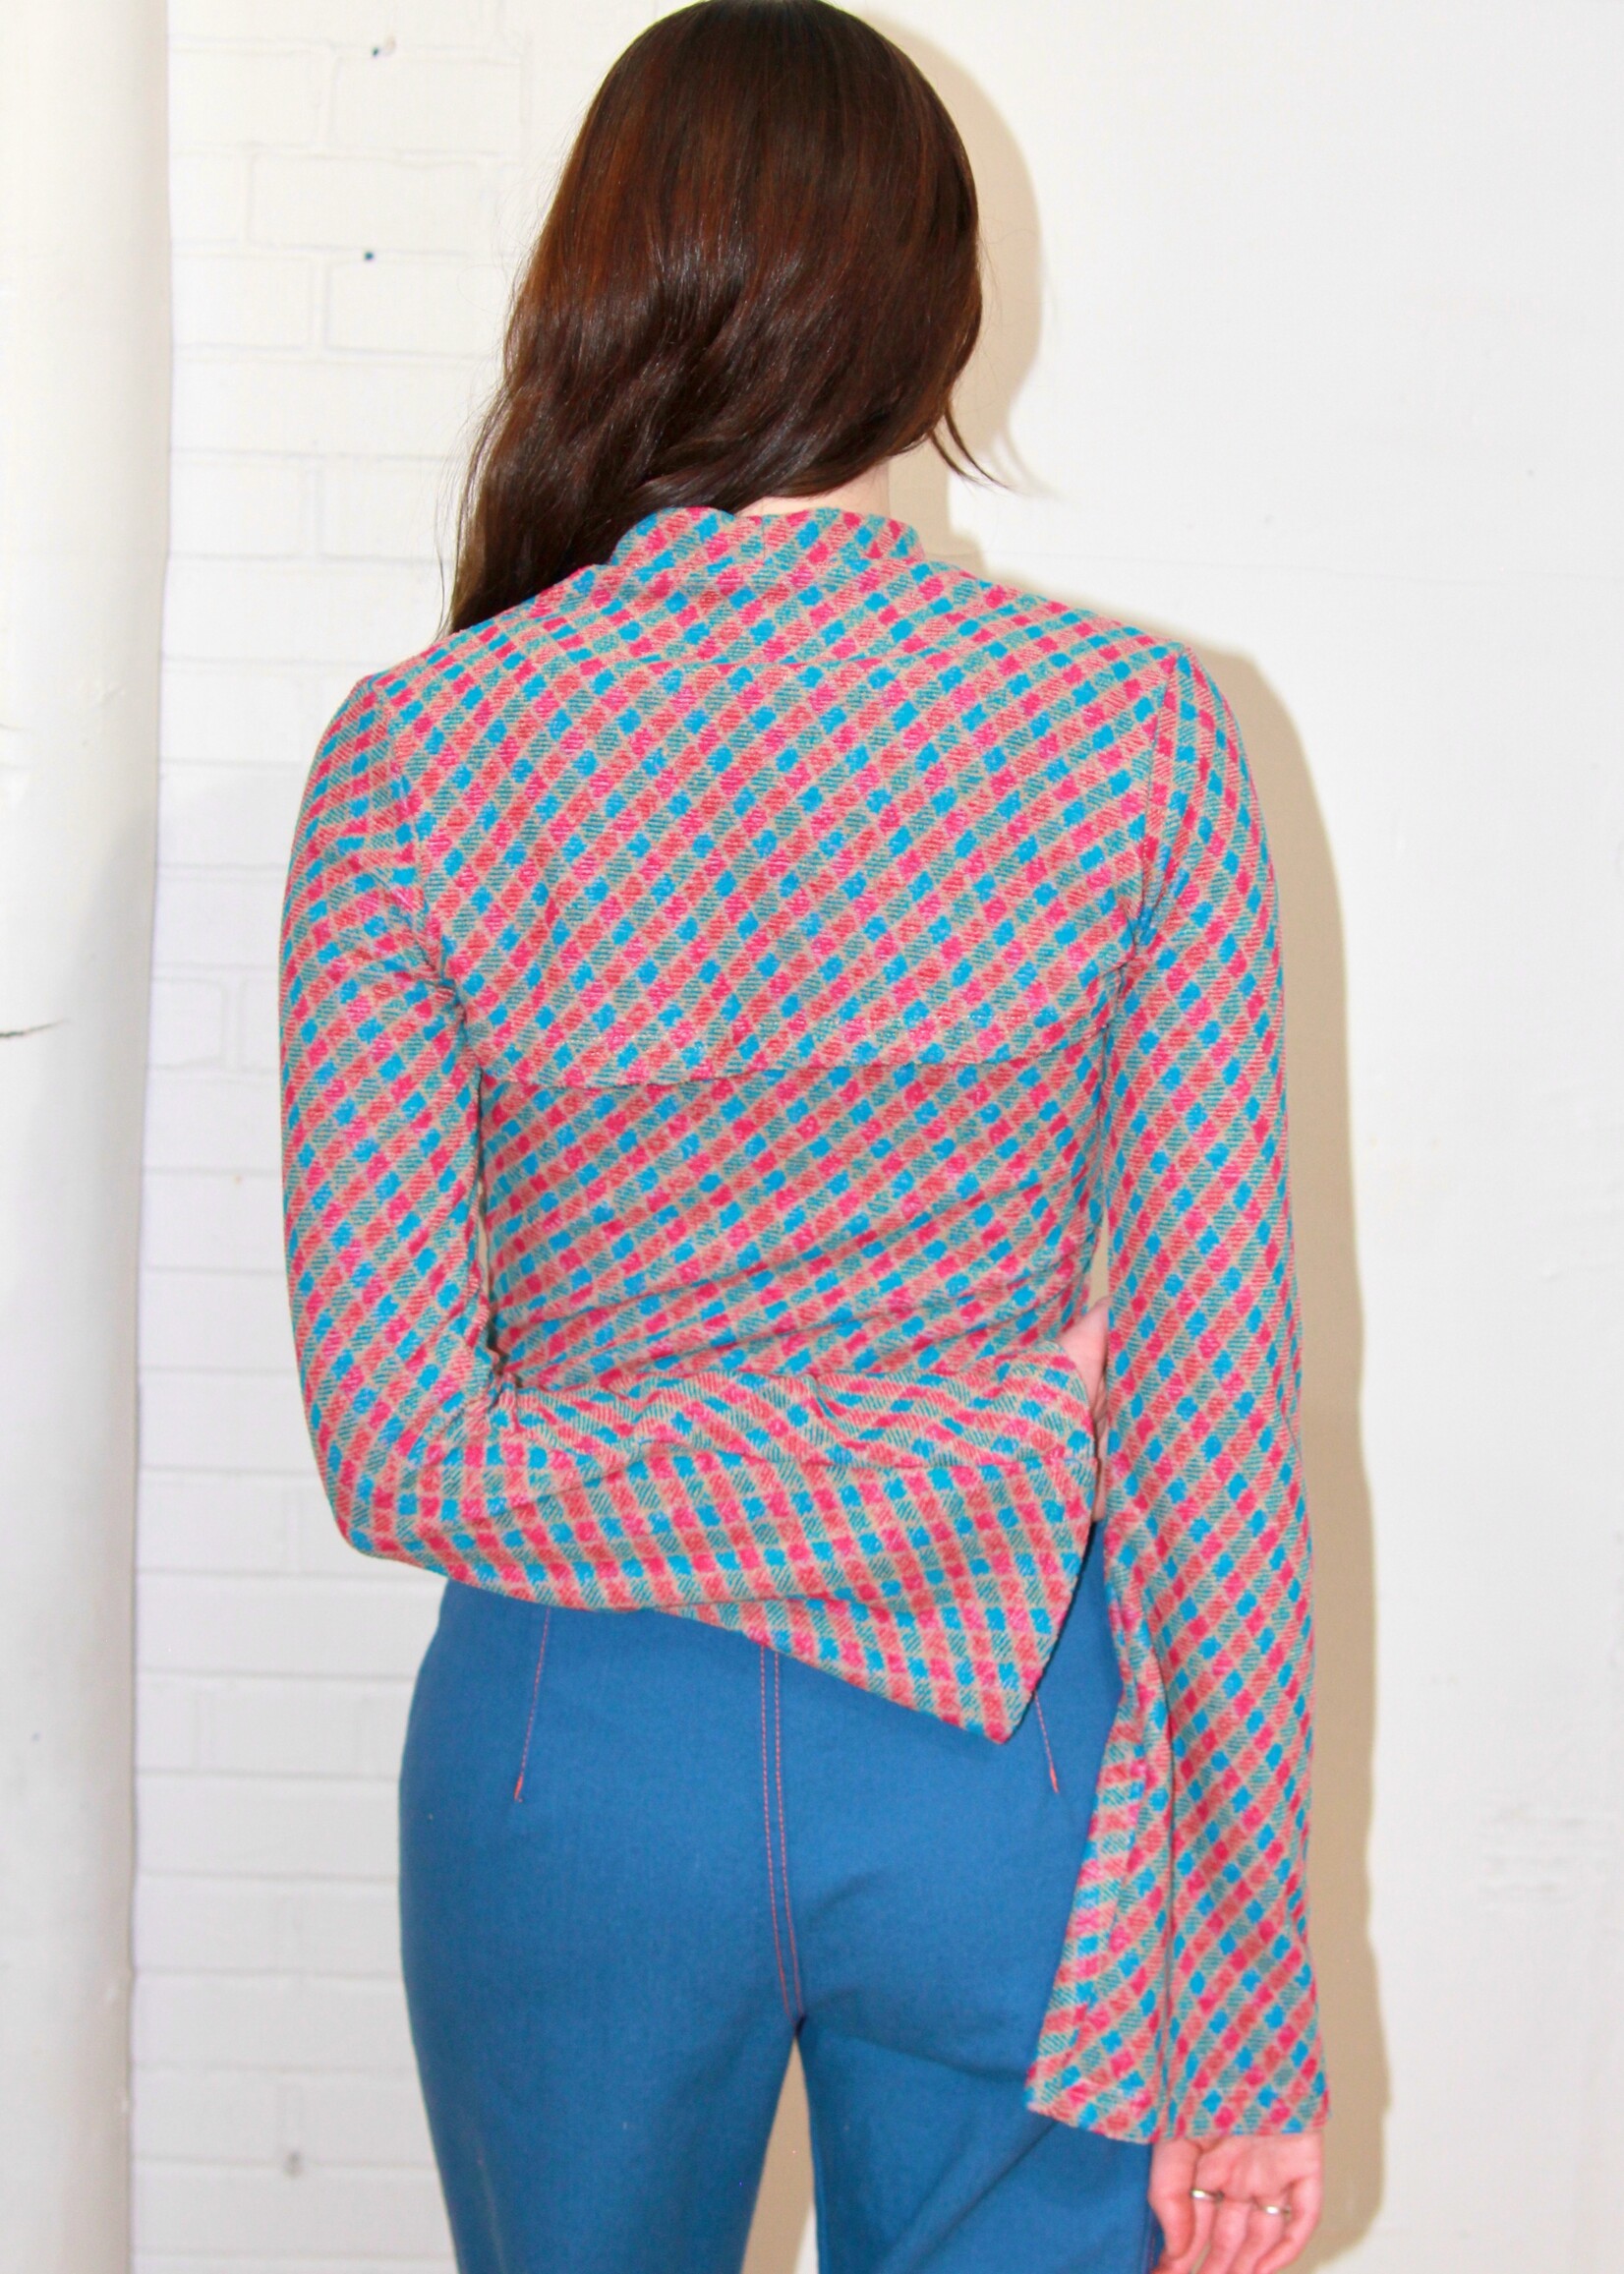 Studio Citizen Studio Citizen Shrug and Tank Top Combo in Turquoise and Pink Diamond